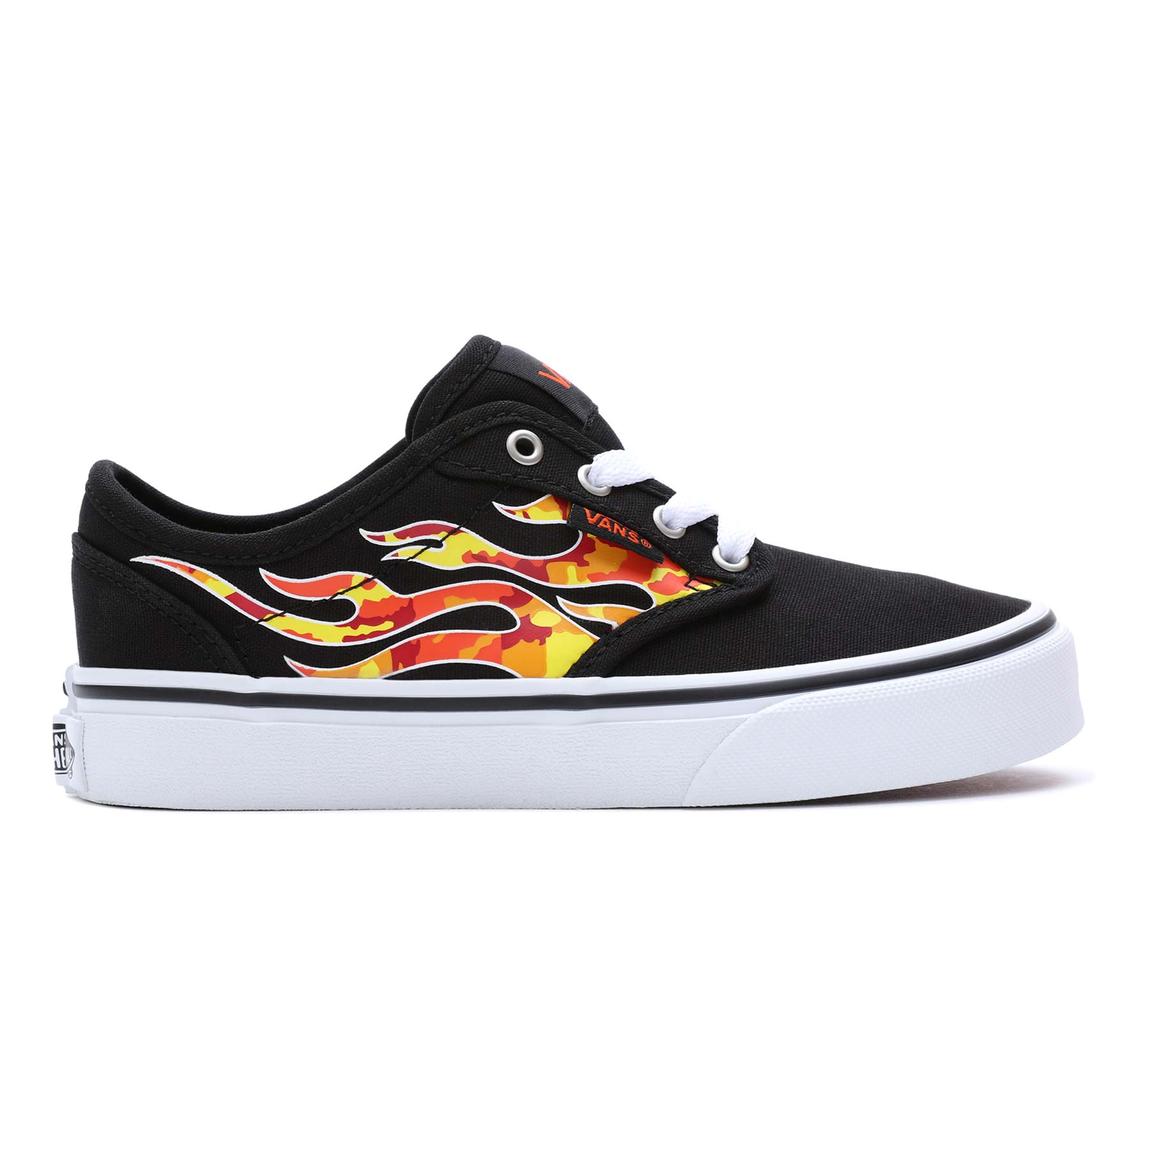 Vans Youth Atwood Flame Vn0a45jsba21 Footwear UK12 EU30 / Black,UK13 EU31 / Black,UK1 EU32 / Black,UK2 EU33 / Black,UK3 EU35 / Black,UK4 EU36.5 / Black,UK5 EU38 / Black,UK6 EU39 / Black